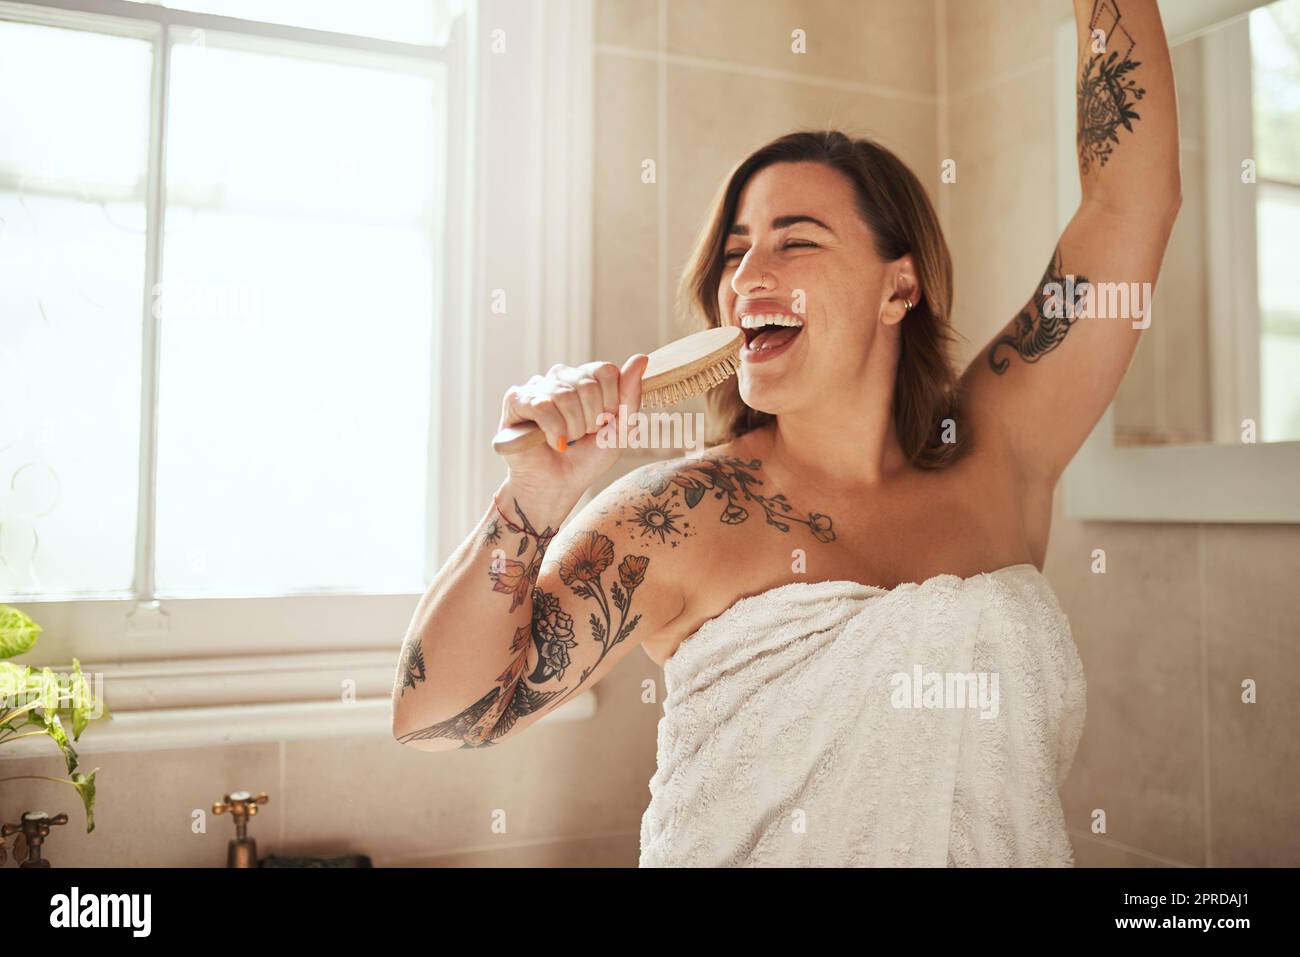 Start off everyday with a song in your heart. an attractive young woman singing while going through her morning beauty routine at home. Stock Photo